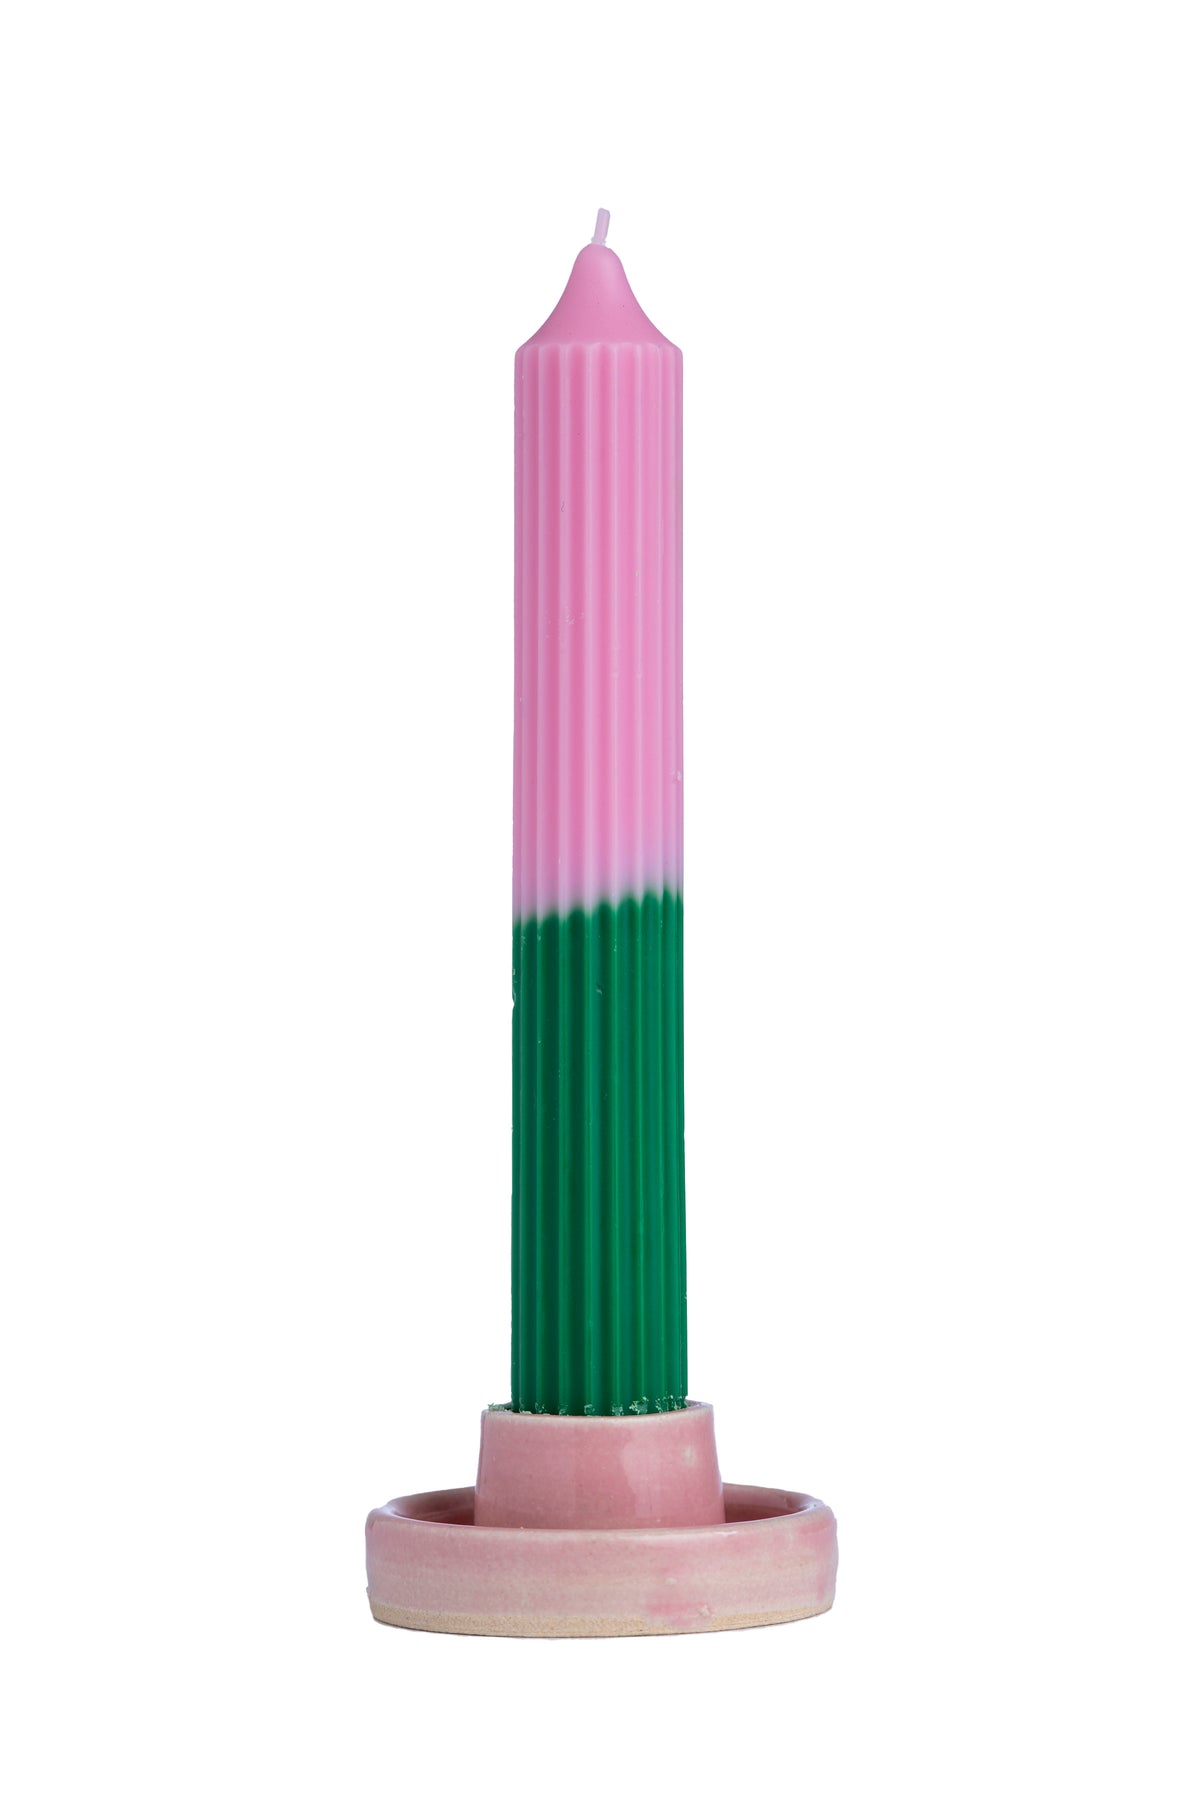 Skinny tall drippy pillar candle, pink & green NO HOLDER